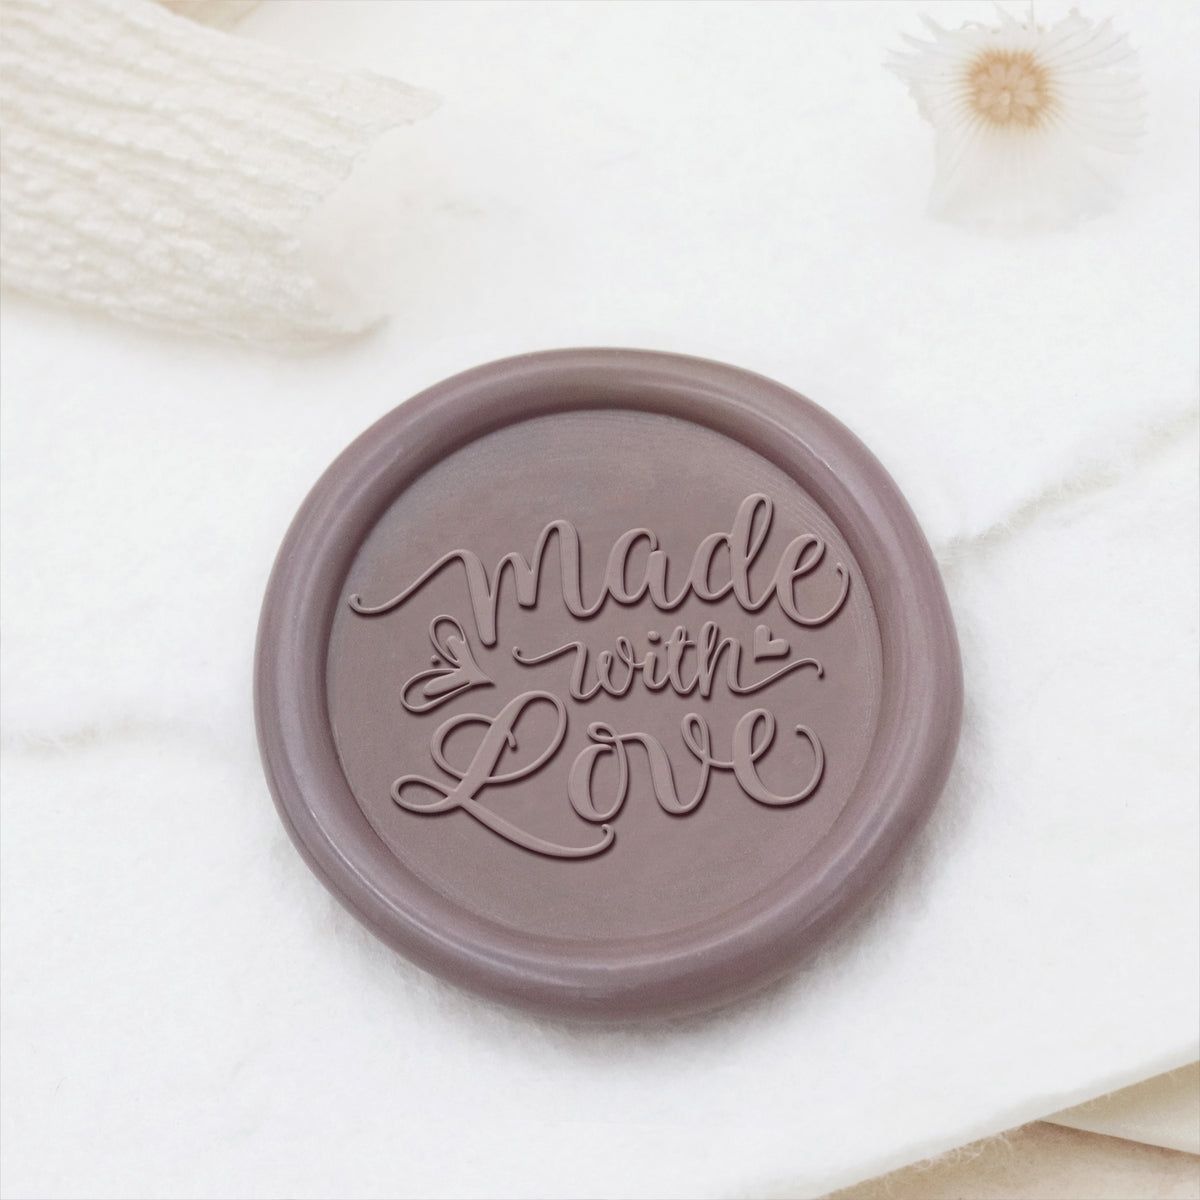 Wedding Invitation & Announcement Wax Seal Stamp - Style 26 26-2